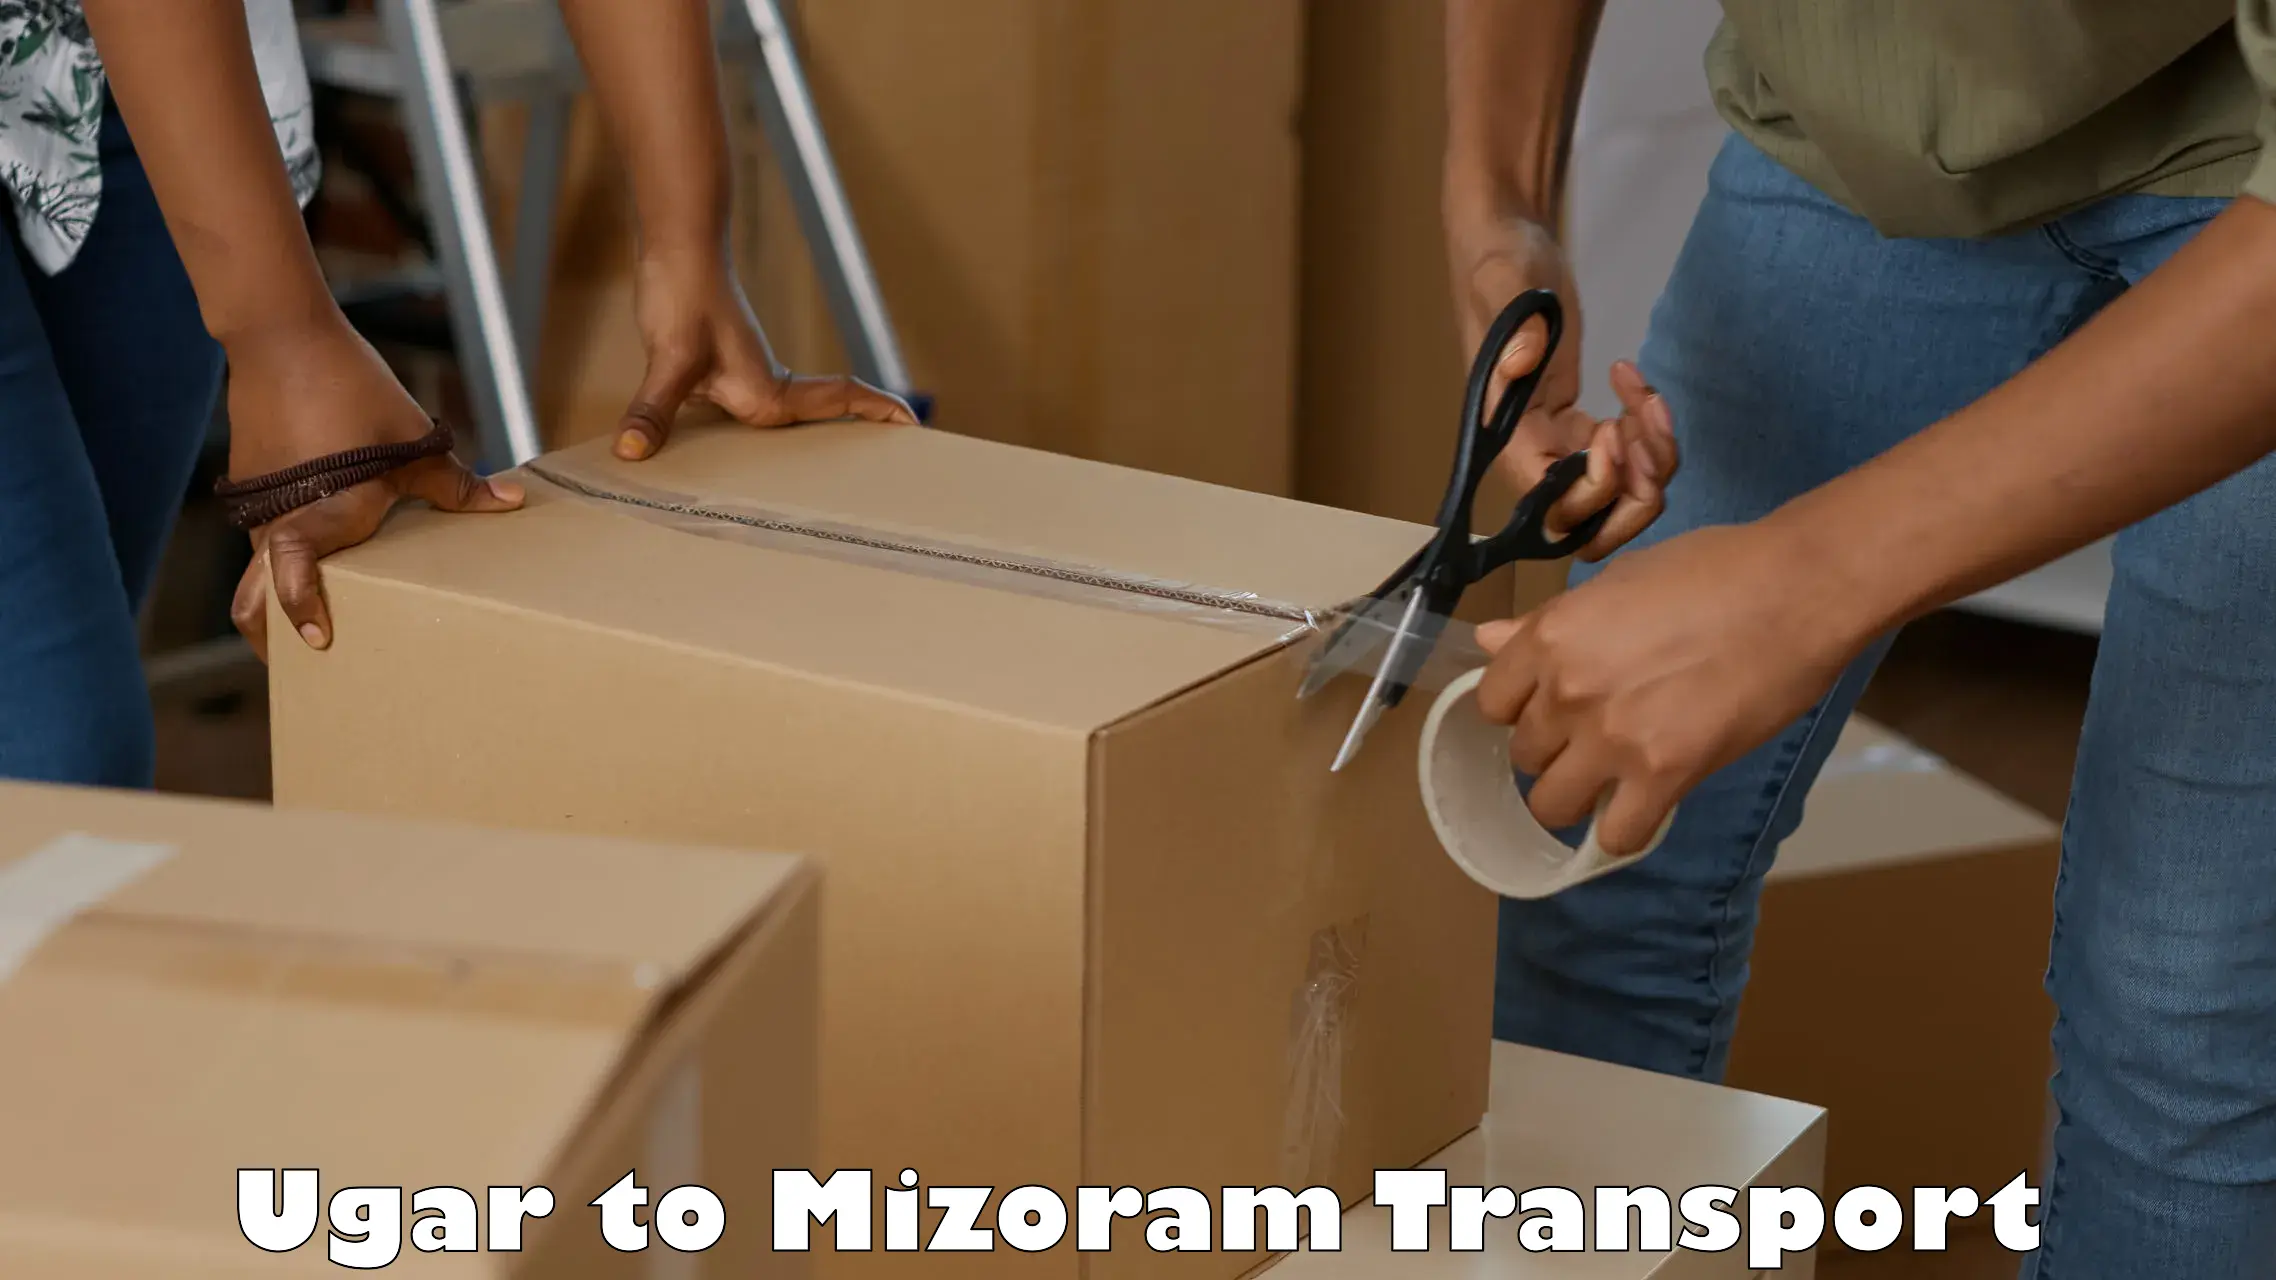 Transport bike from one state to another Ugar to Mizoram